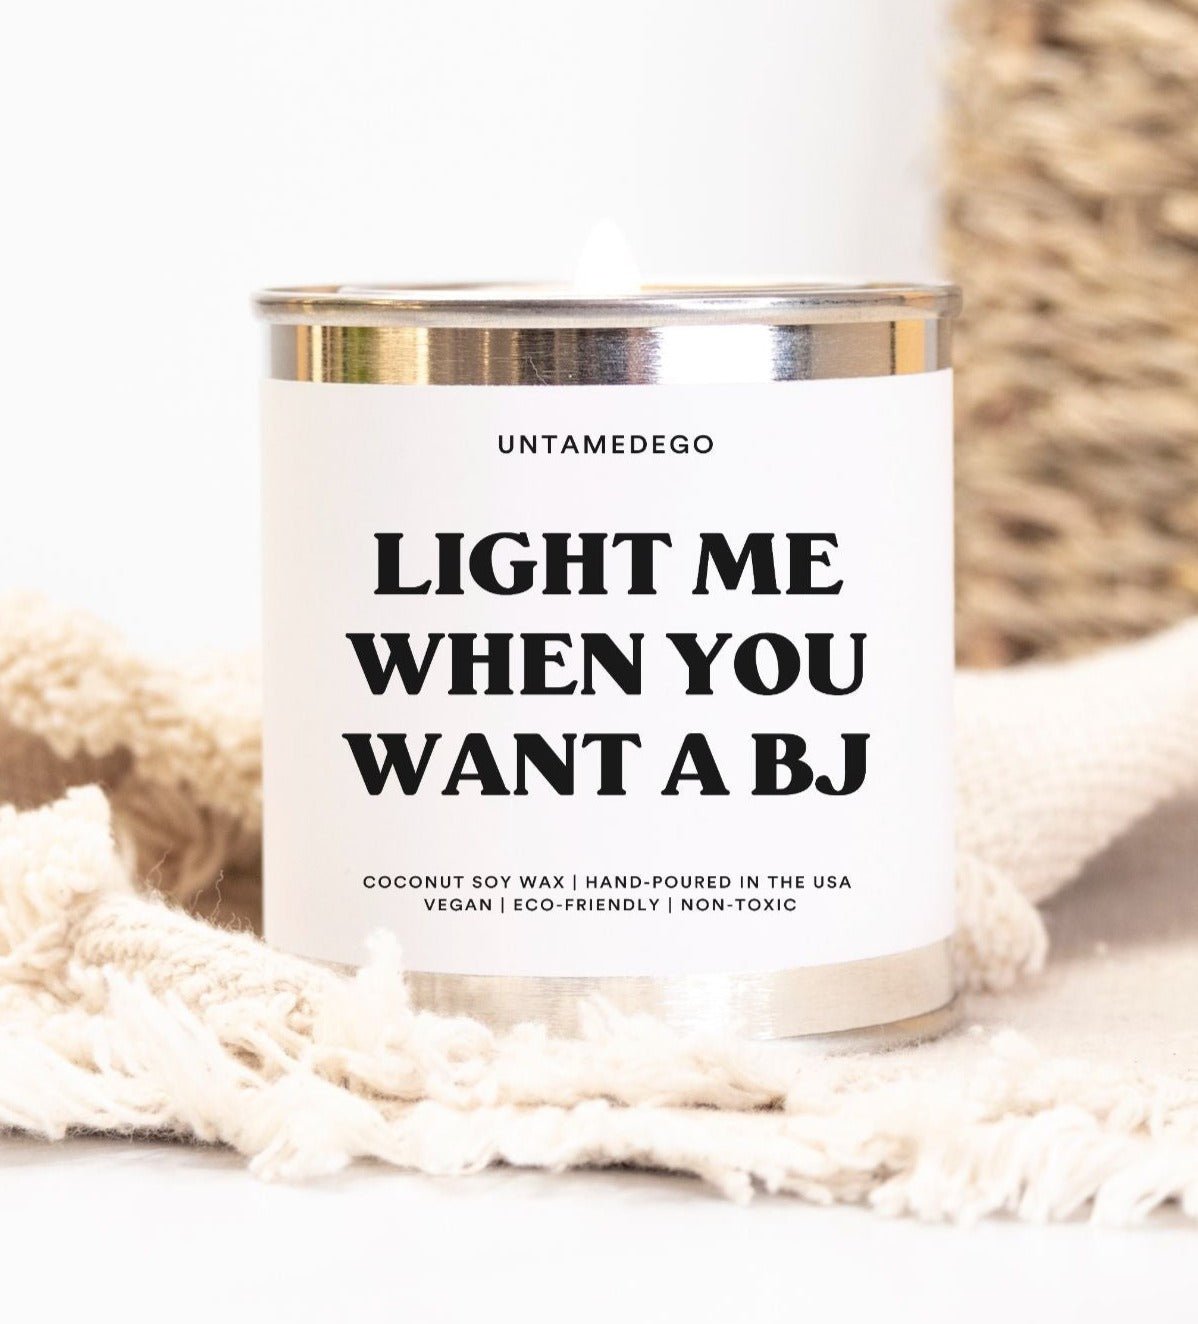 Light Me When You Want A BJ Paint Can Candle - UntamedEgo LLC.